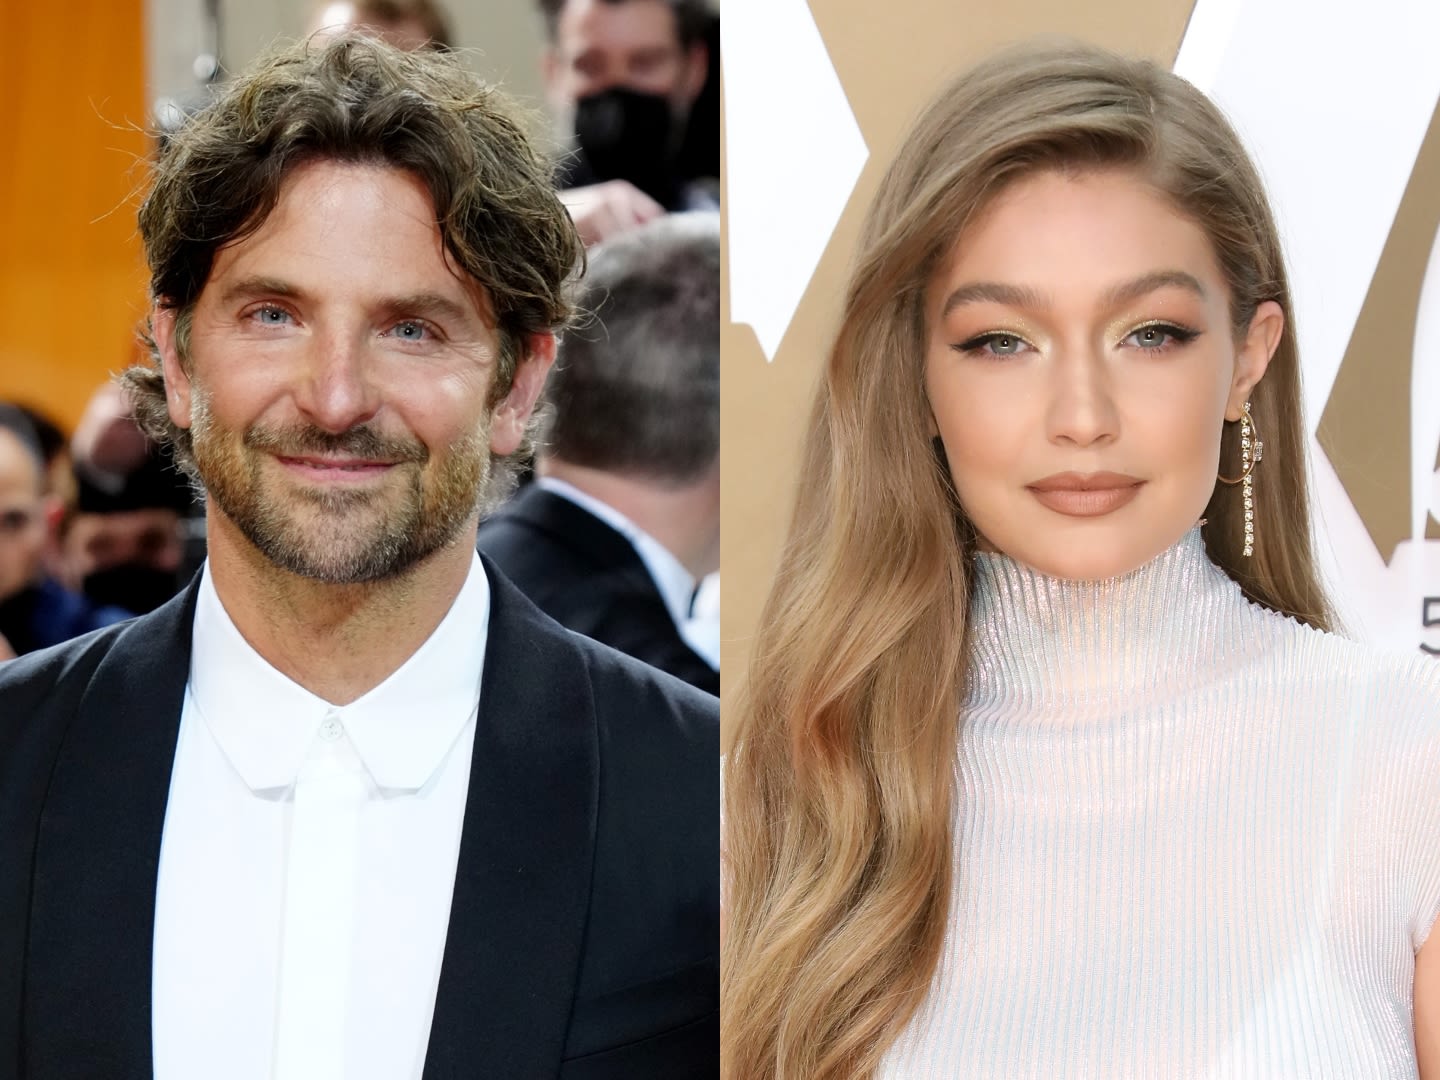 Gigi Hadid & Bradley Cooper Just Took a Major Step: Their Most Public Date Yet